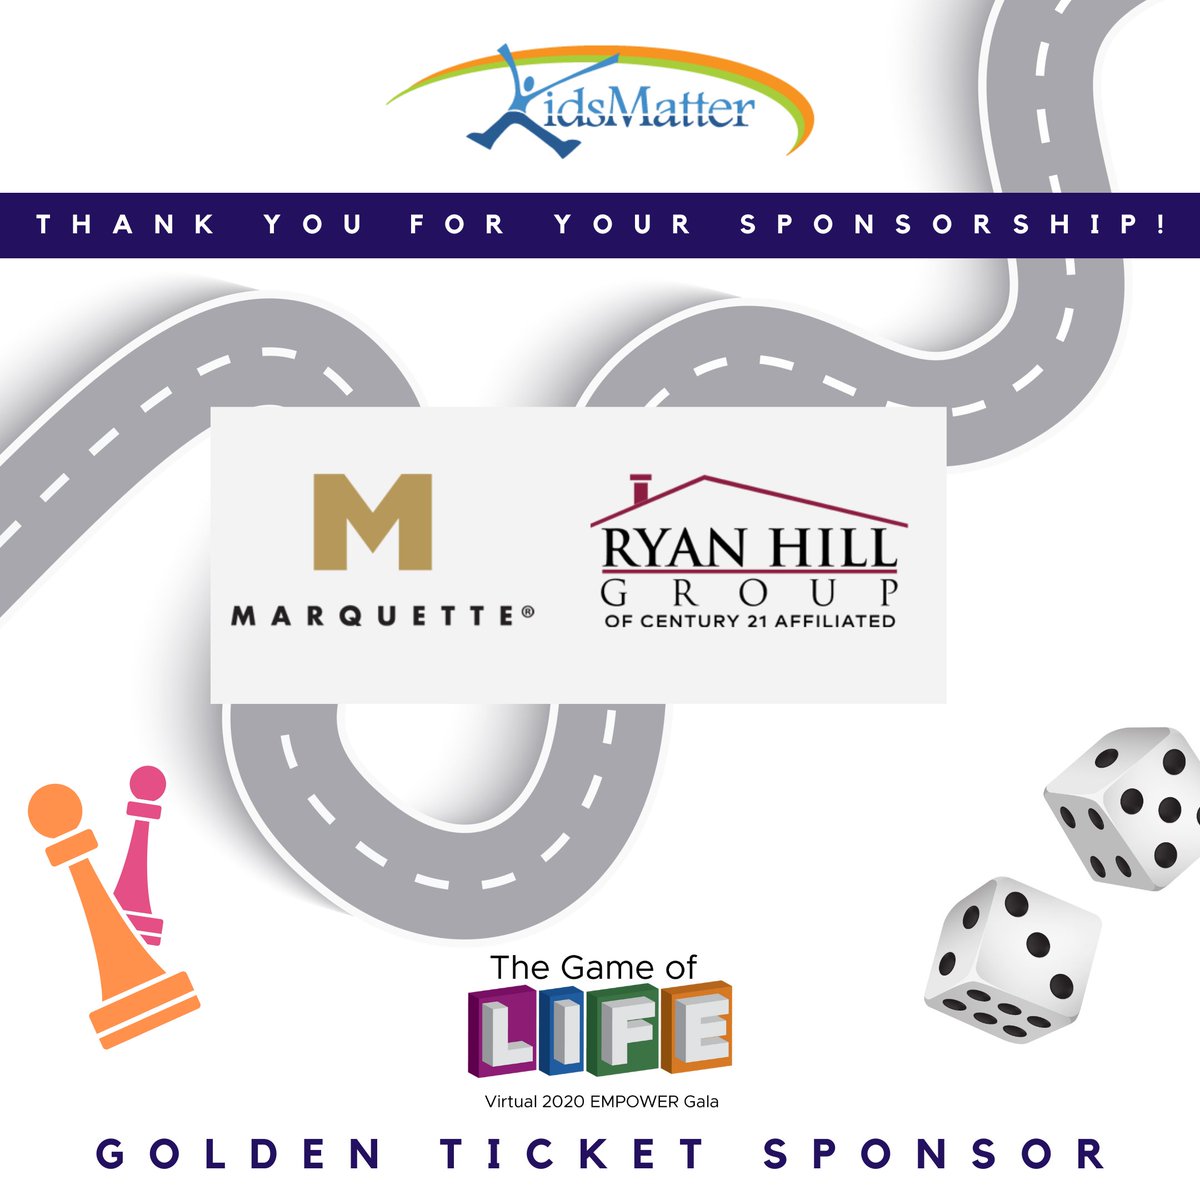 Sponsorships are making our virtual event this year possible! Thank you, Marquette Companies & @RyanHillGroup 

Elevate your lifestyle with Naperville’s premier housing partners.

For more information, visit bit.ly/32uvKn7 or bit.ly/2EovMFm.